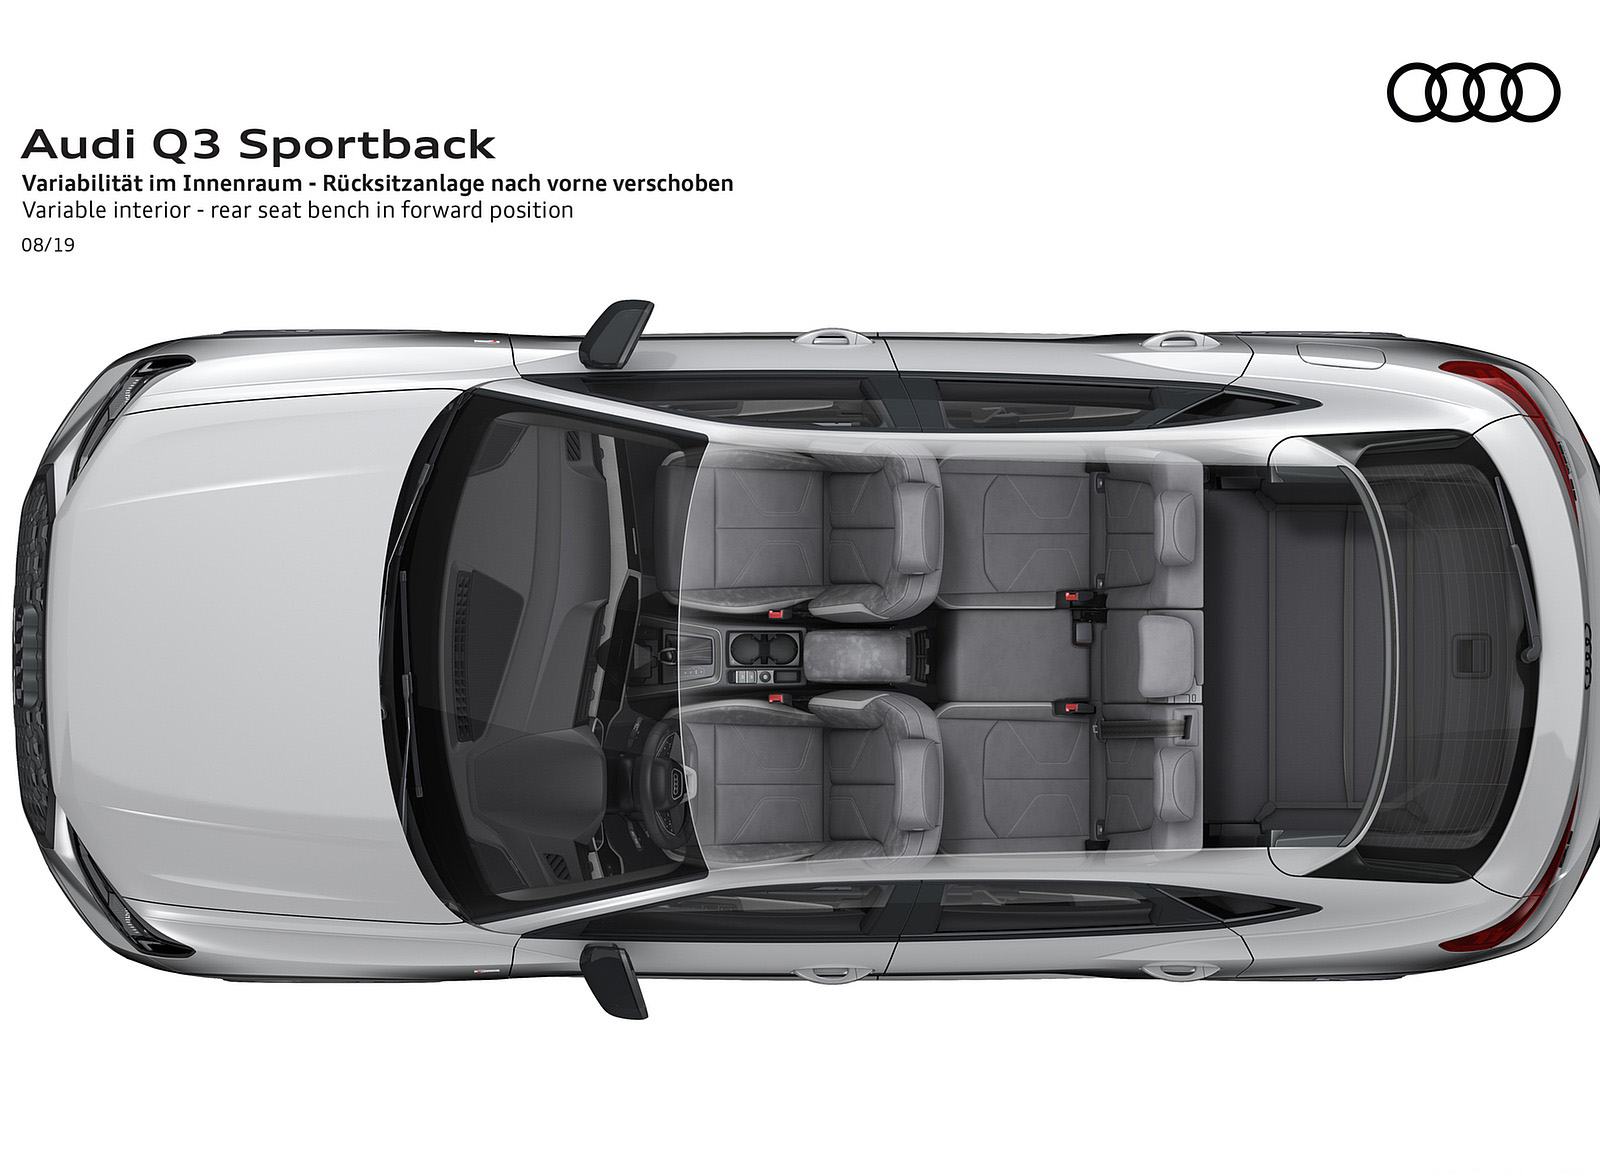 2020 Audi Q3 Sportback Variable interior rear seat bench in forward position Wallpapers #263 of 285